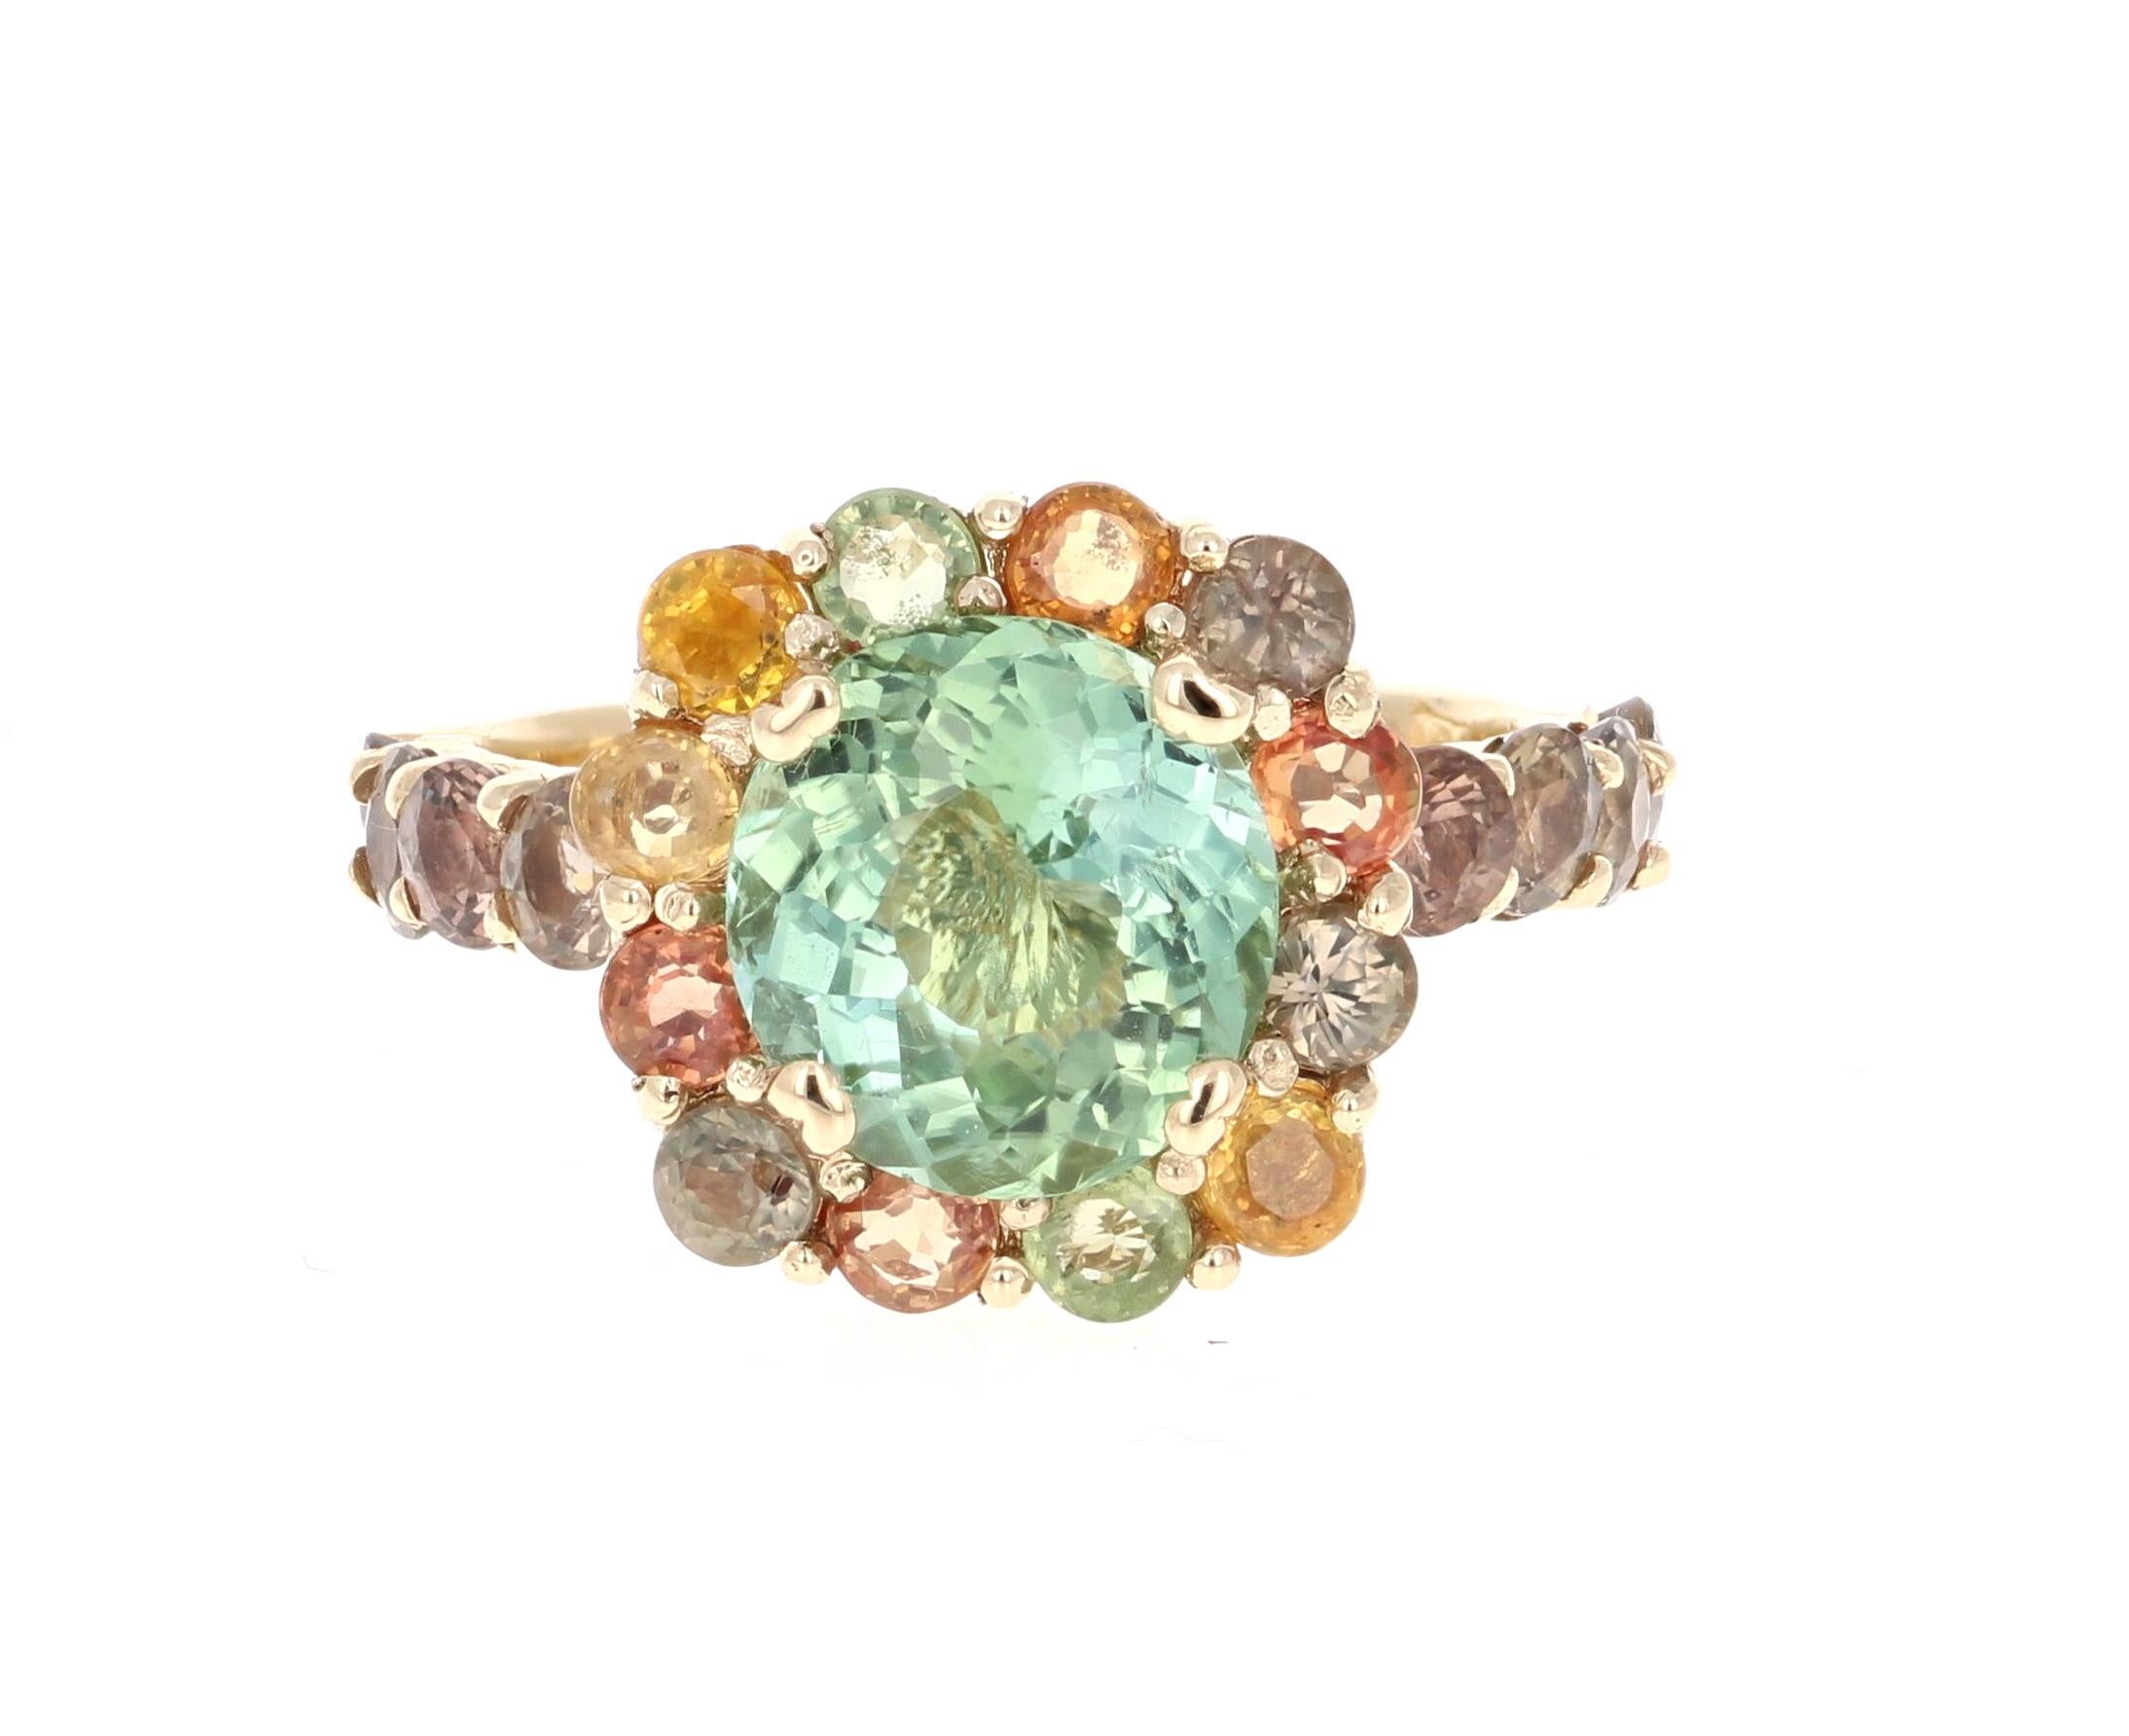 Uniquely Designed Ring with Warm Hues of Multi-Colored Sapphires & Tourmaline!

This beautiful ring has a Round Cut Green Tourmaline that weighs 2.71 Carats as the center stone. The Tourmaline is surrounded by 22 Multi-Colored Sapphires that weigh